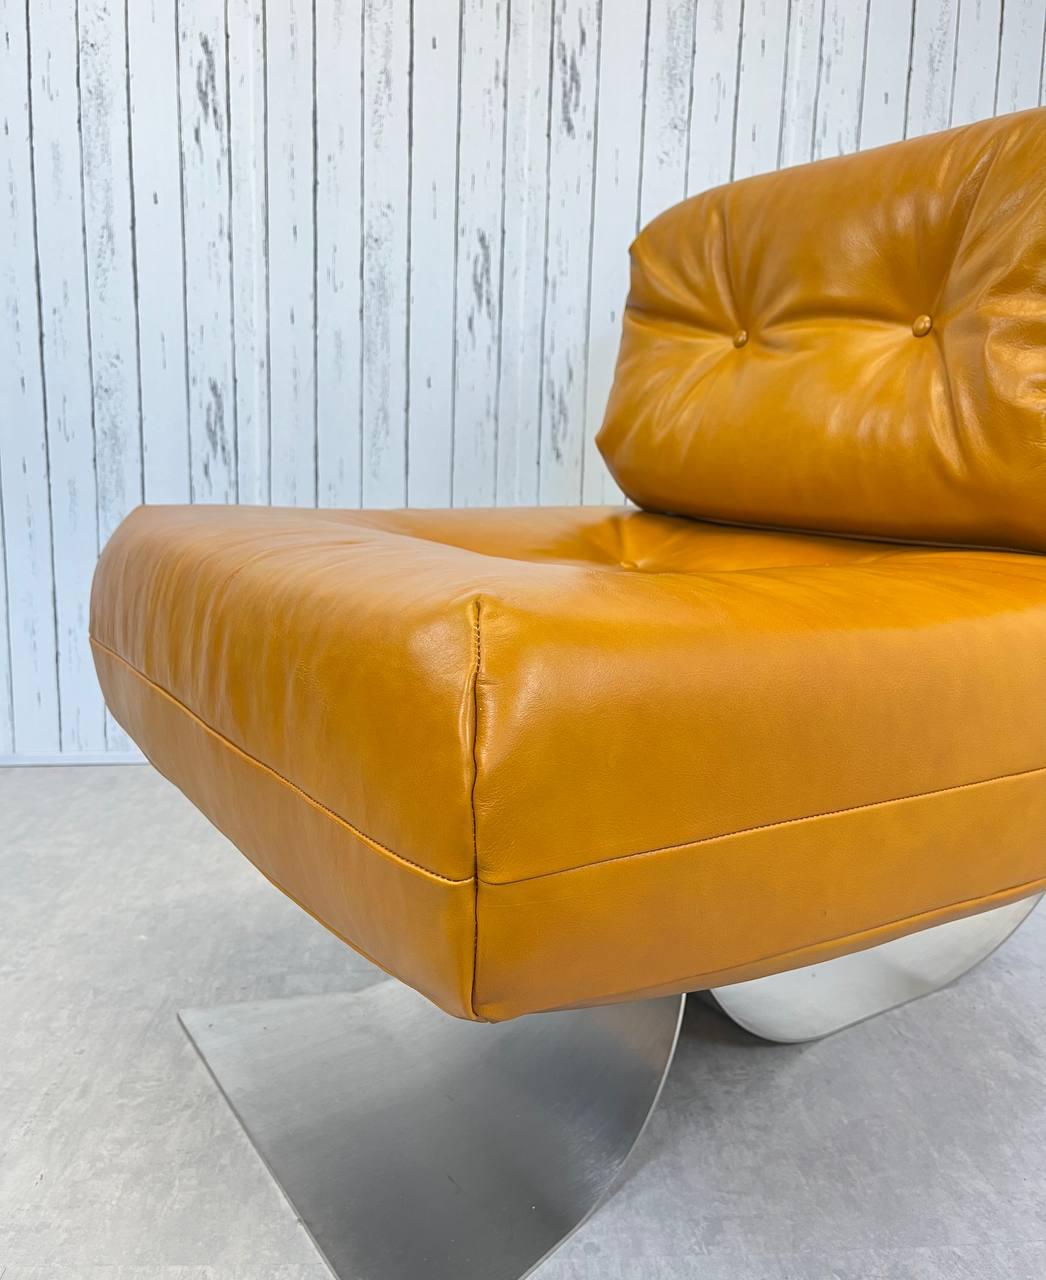 High Armchair Mobilier International Oscar Niemeyer In Good Condition For Sale In Minerbio, BO